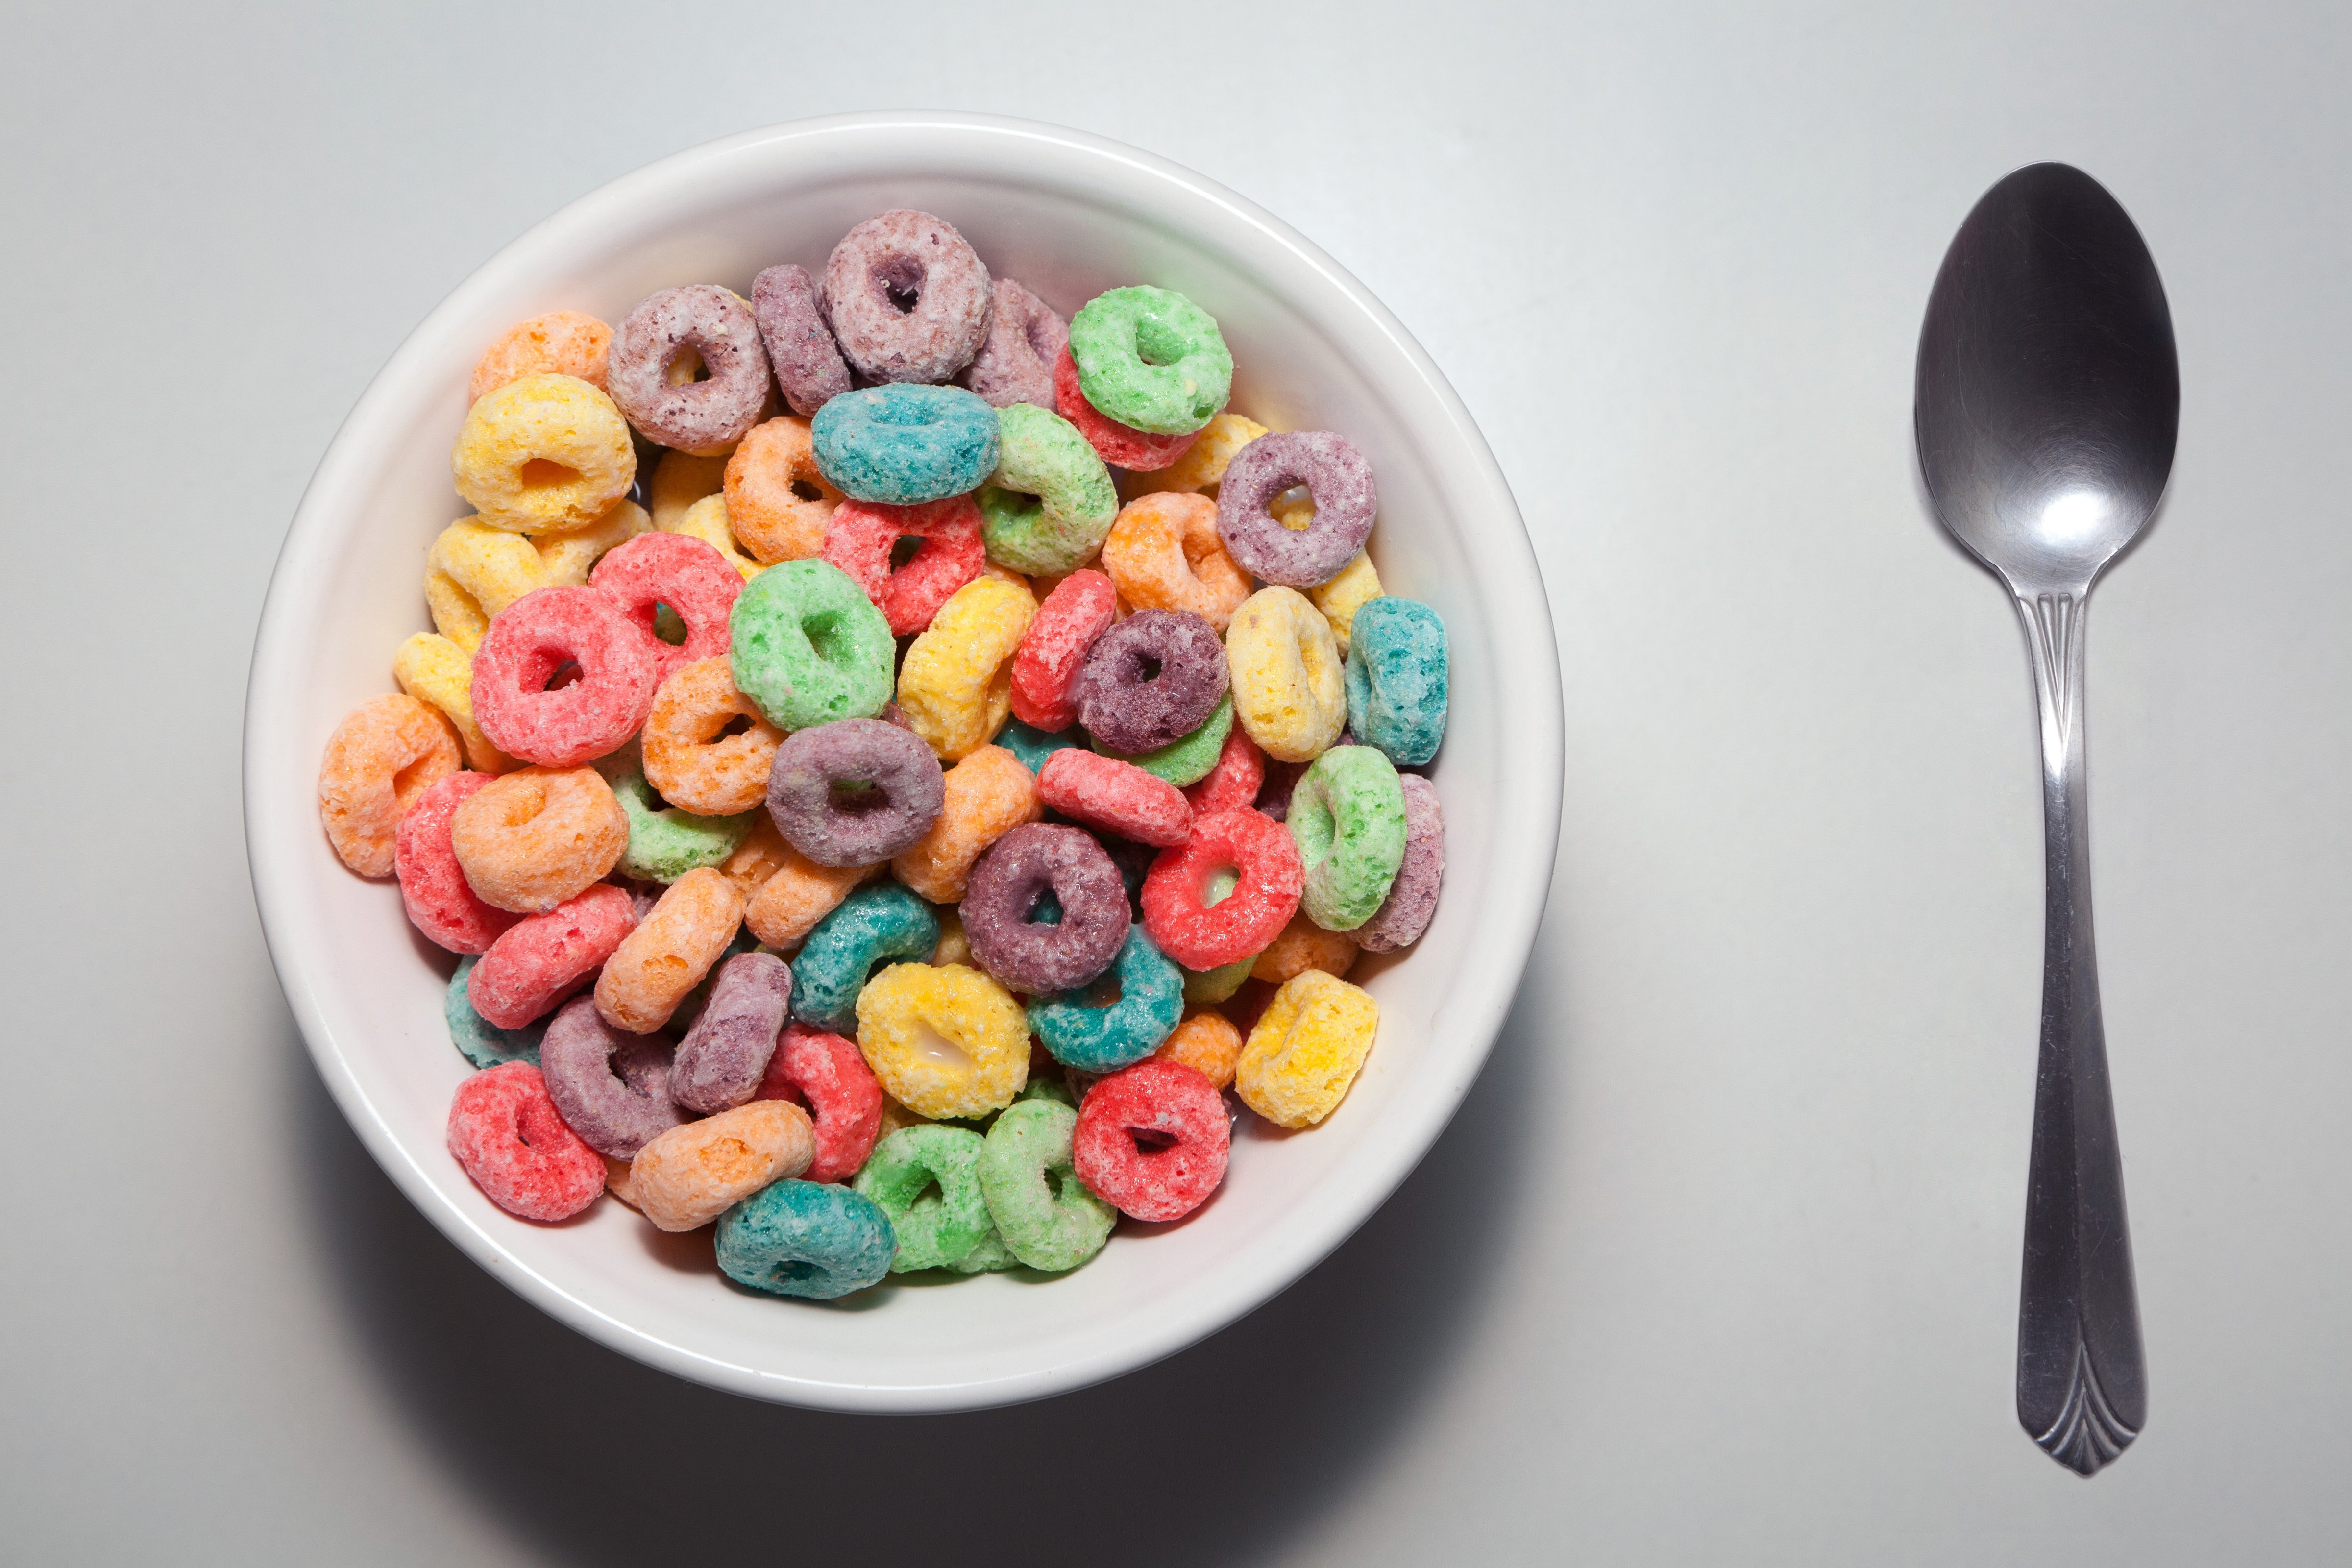 Bowl of colorful breakfast cereal with spoon